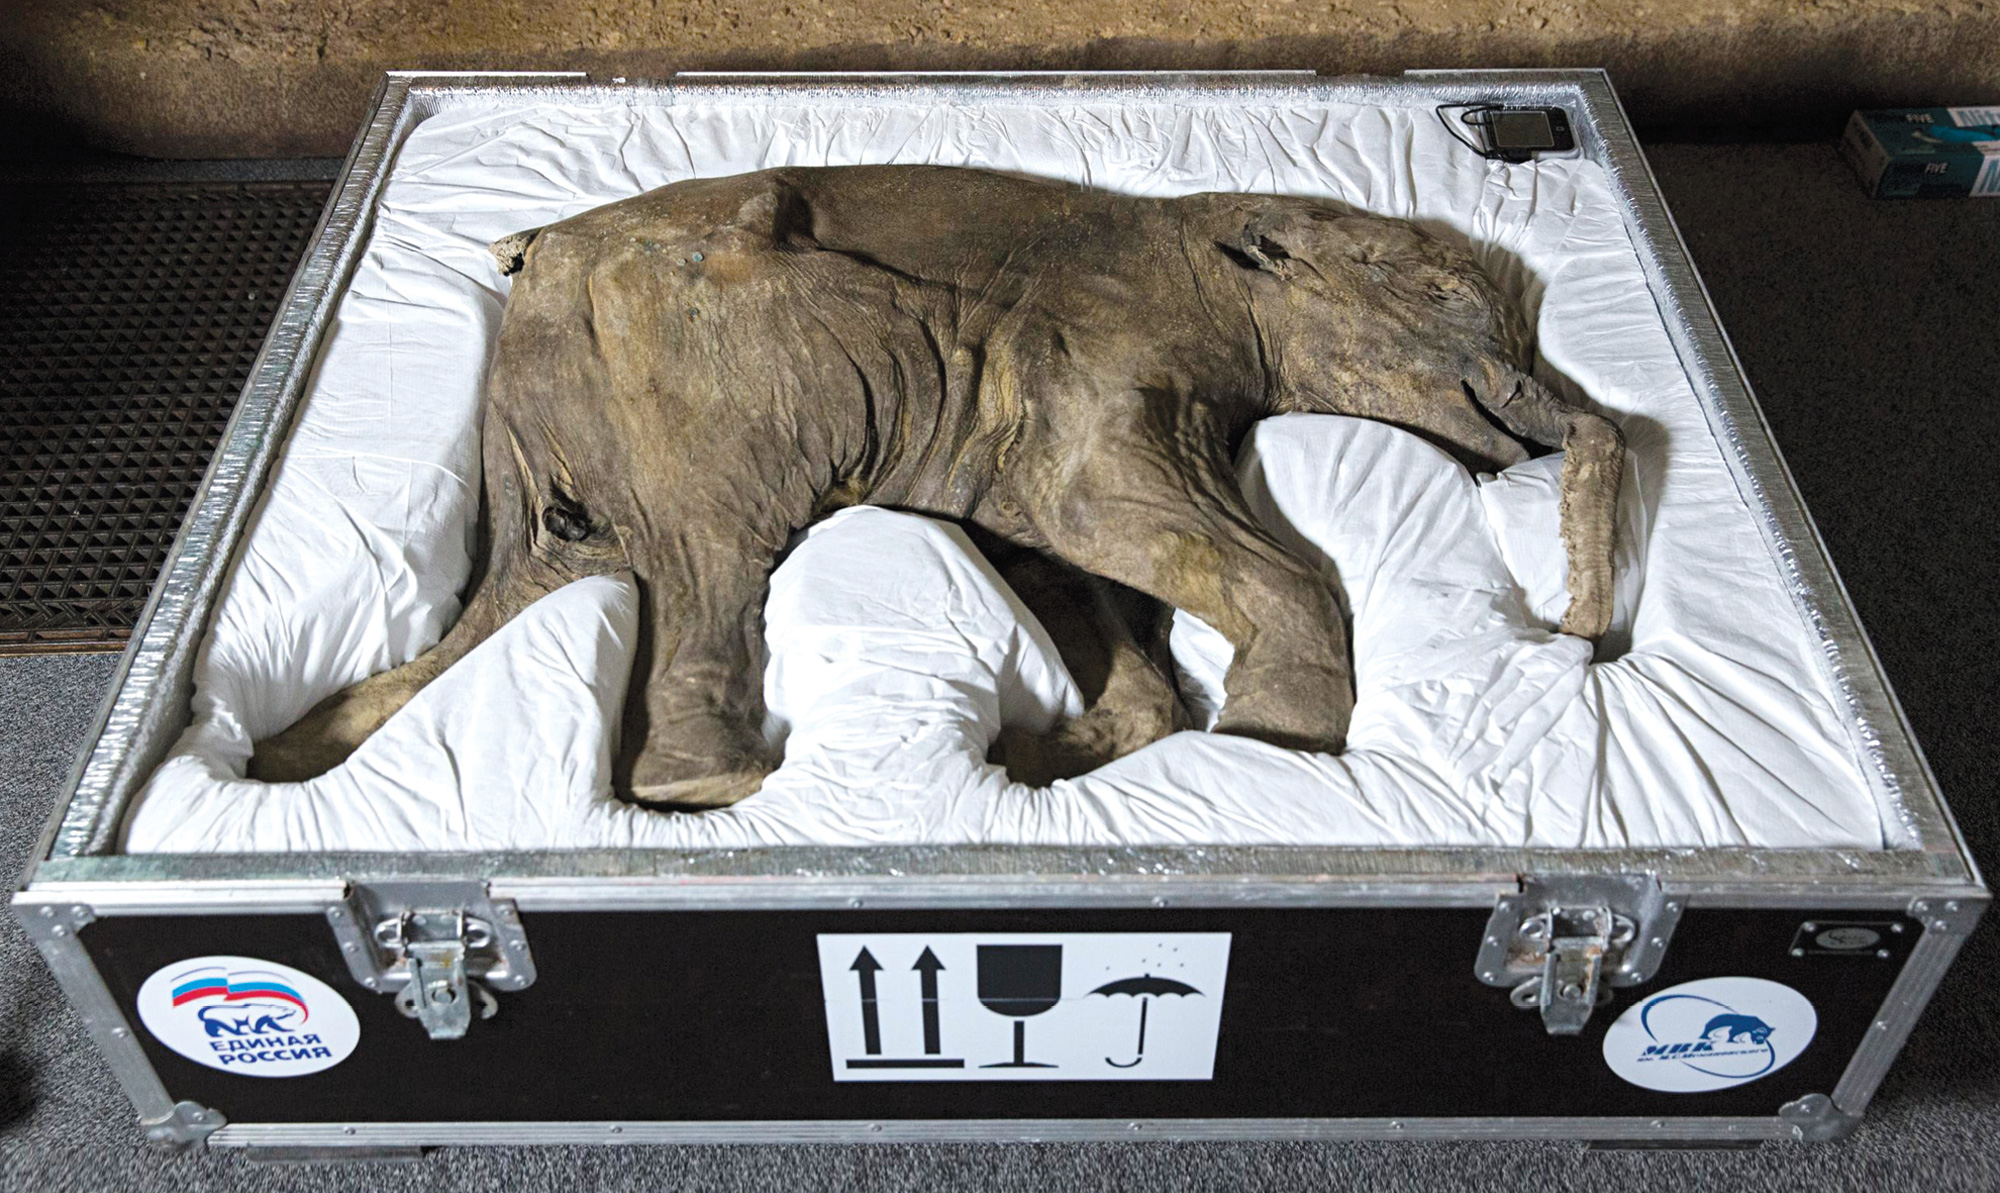 Lyuba, the world’s most complete mammoth specimen, drowned in a mudhole during the late Pleistocene ice age. She was discovered in 2006 by Yuri Khudi, a reindeer herder from Russia’s autonomous Yamal-Nenets region, who named her after his wife. Usually shipped to London’s Natural History Museum for an exhibition in 2014. Here she is in the wooden crate purpose-built for the journey—as gently cradled by the cloth and form-fitting foam as by the mud that preserved her for forty-two thousand years.